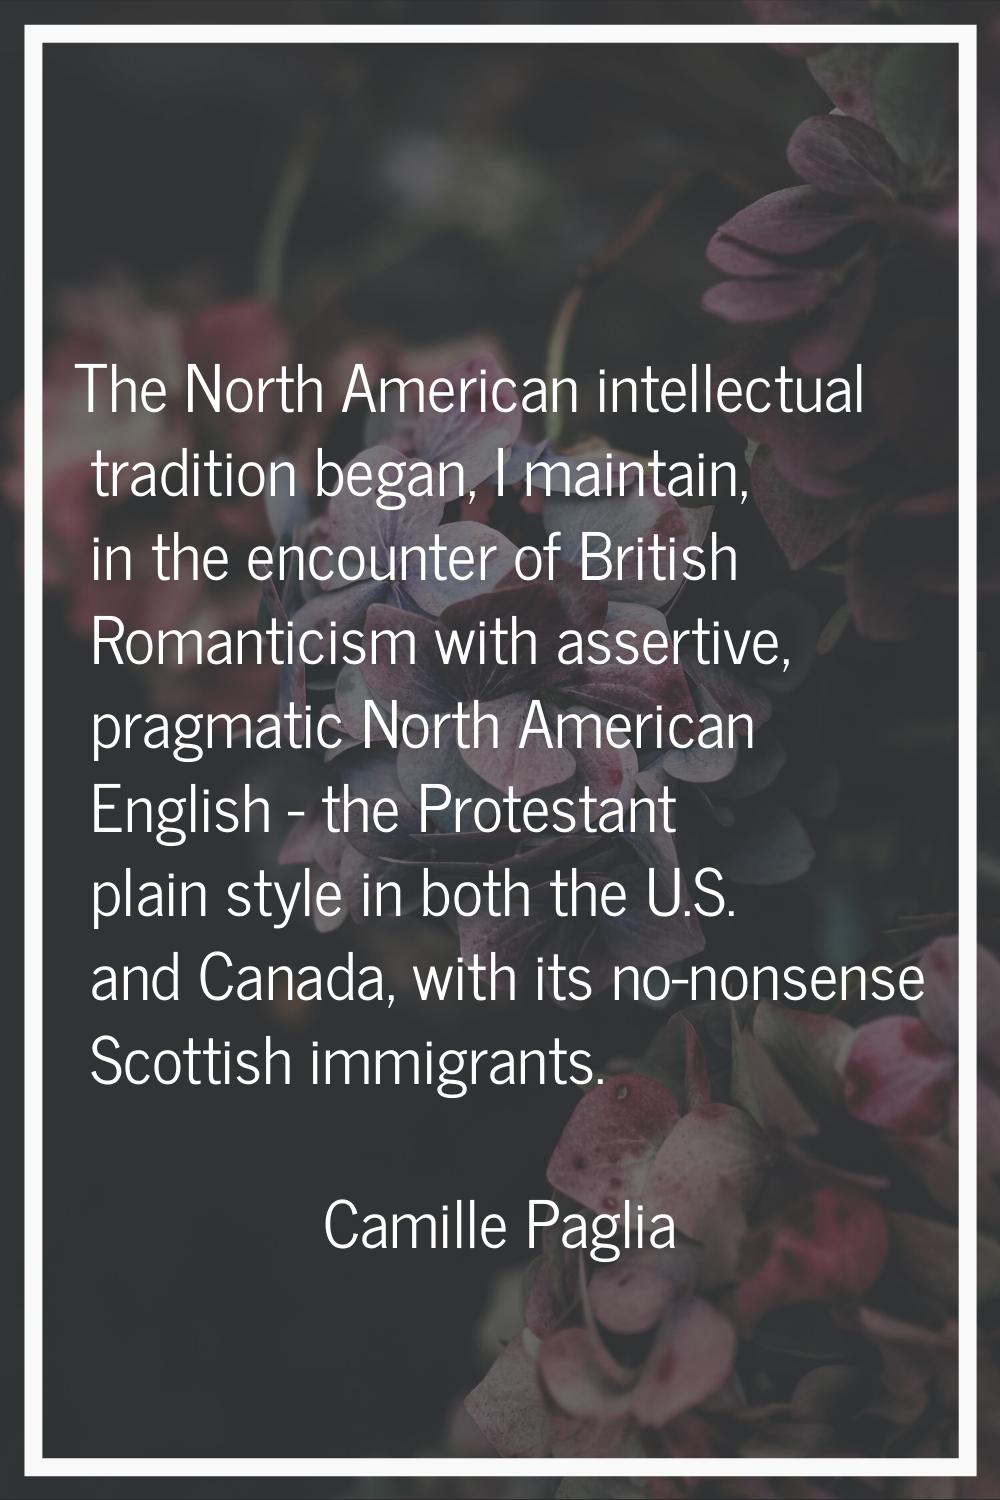 The North American intellectual tradition began, I maintain, in the encounter of British Romanticis